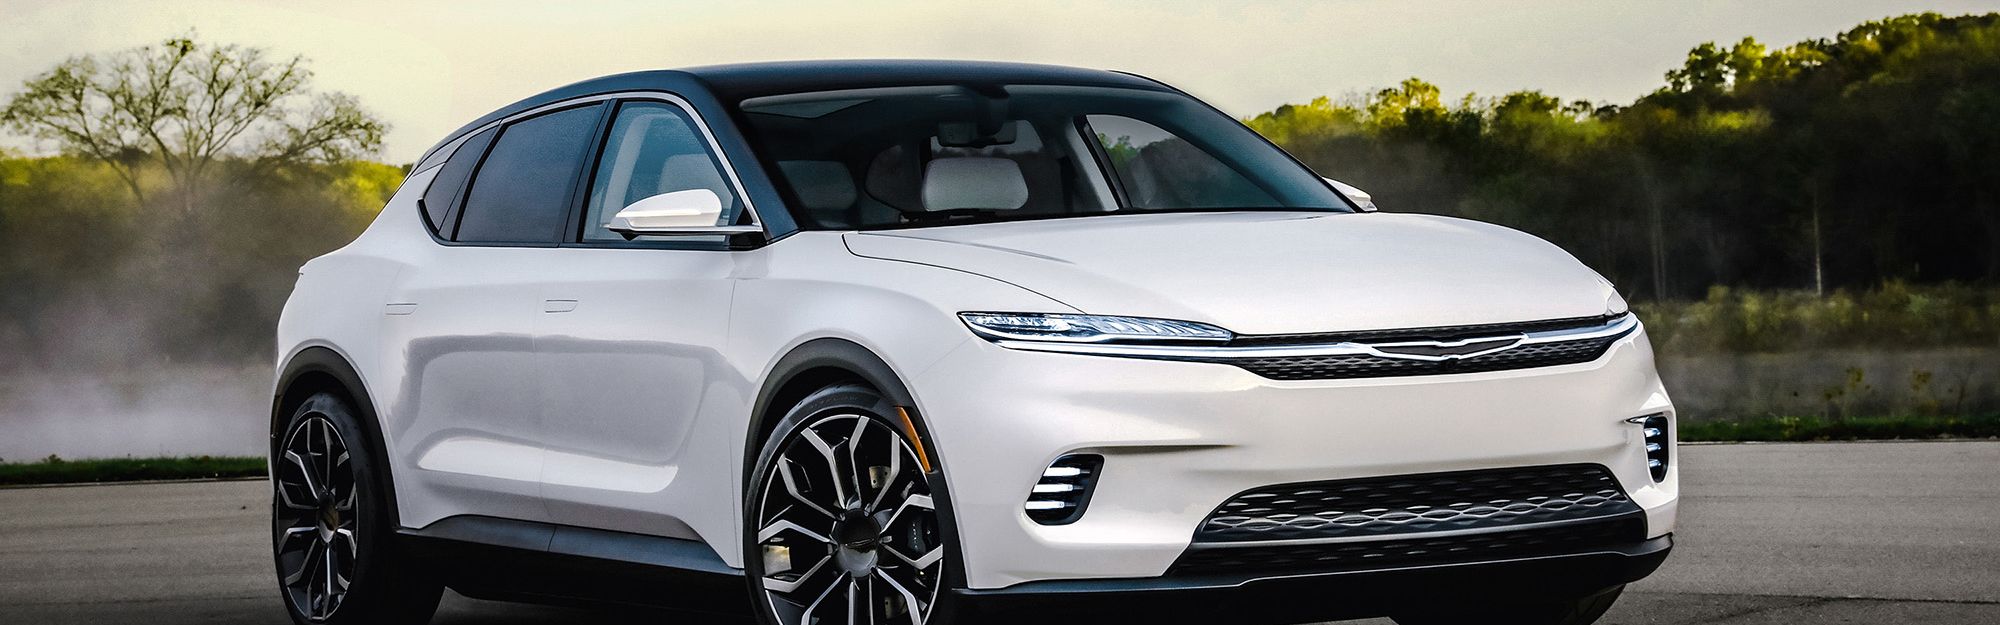 Chrysler unveils an EV concept and a future for the brand | CNN Business